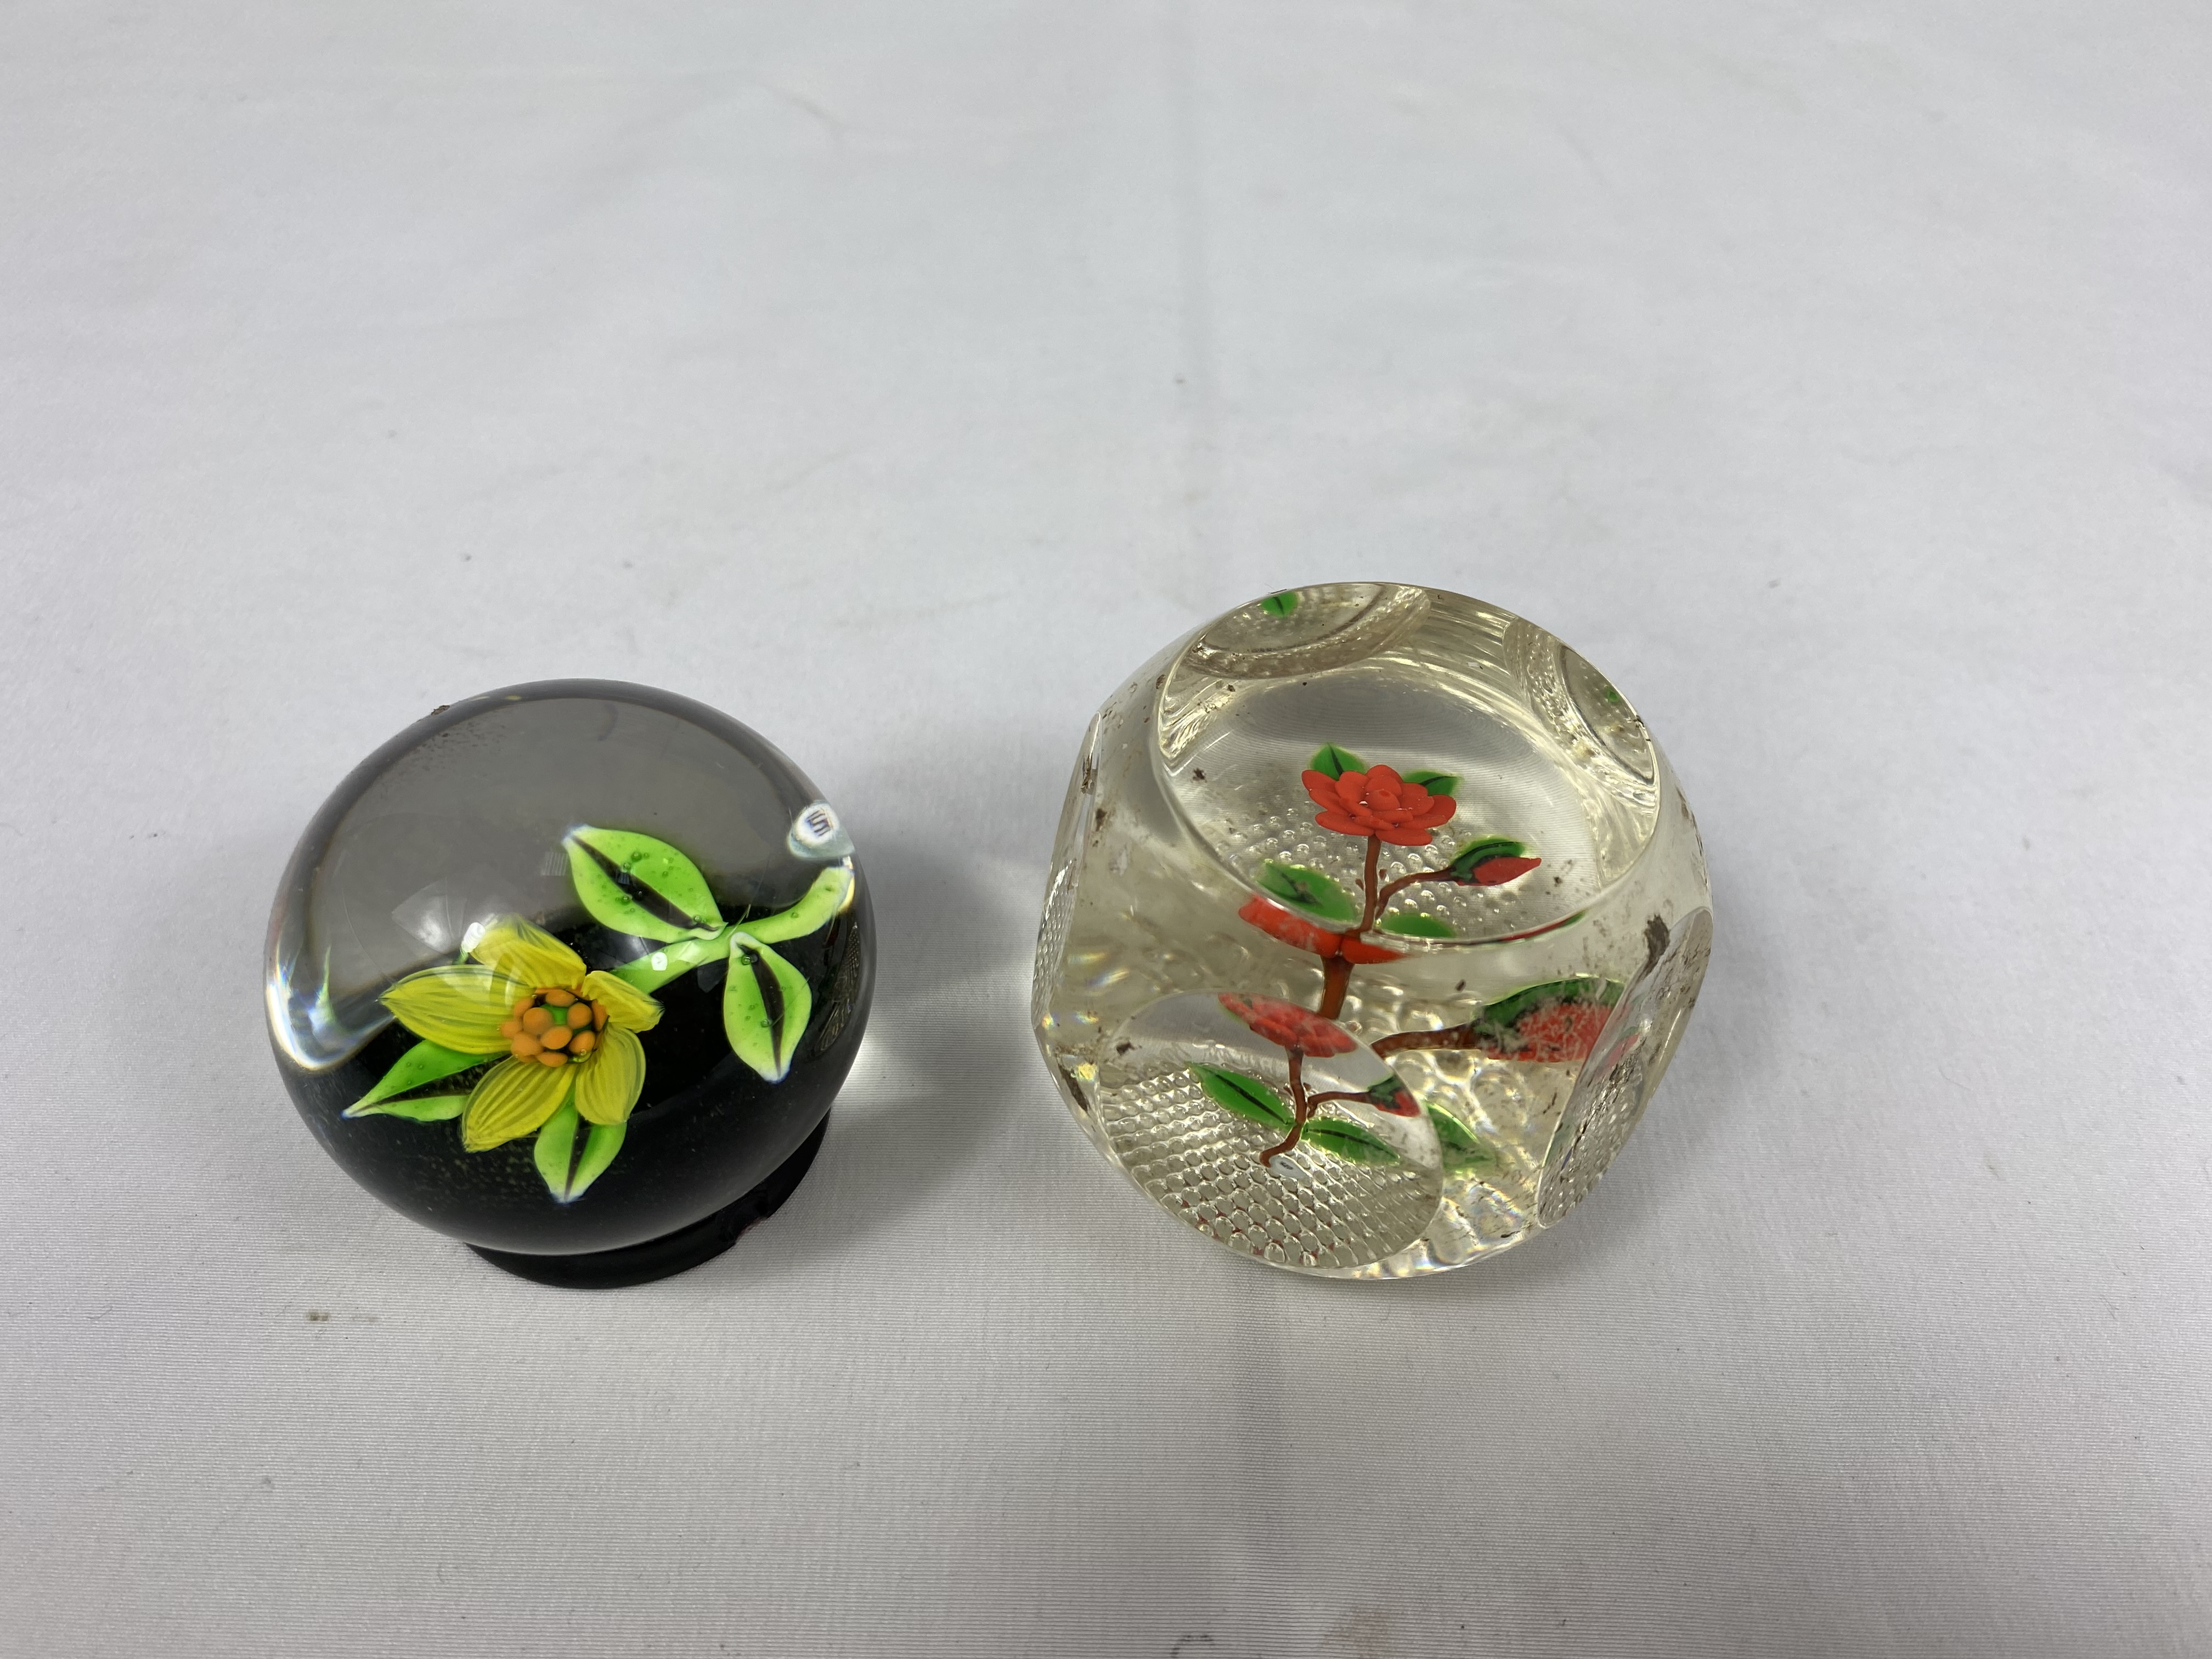 Two William Manson glass paperweights